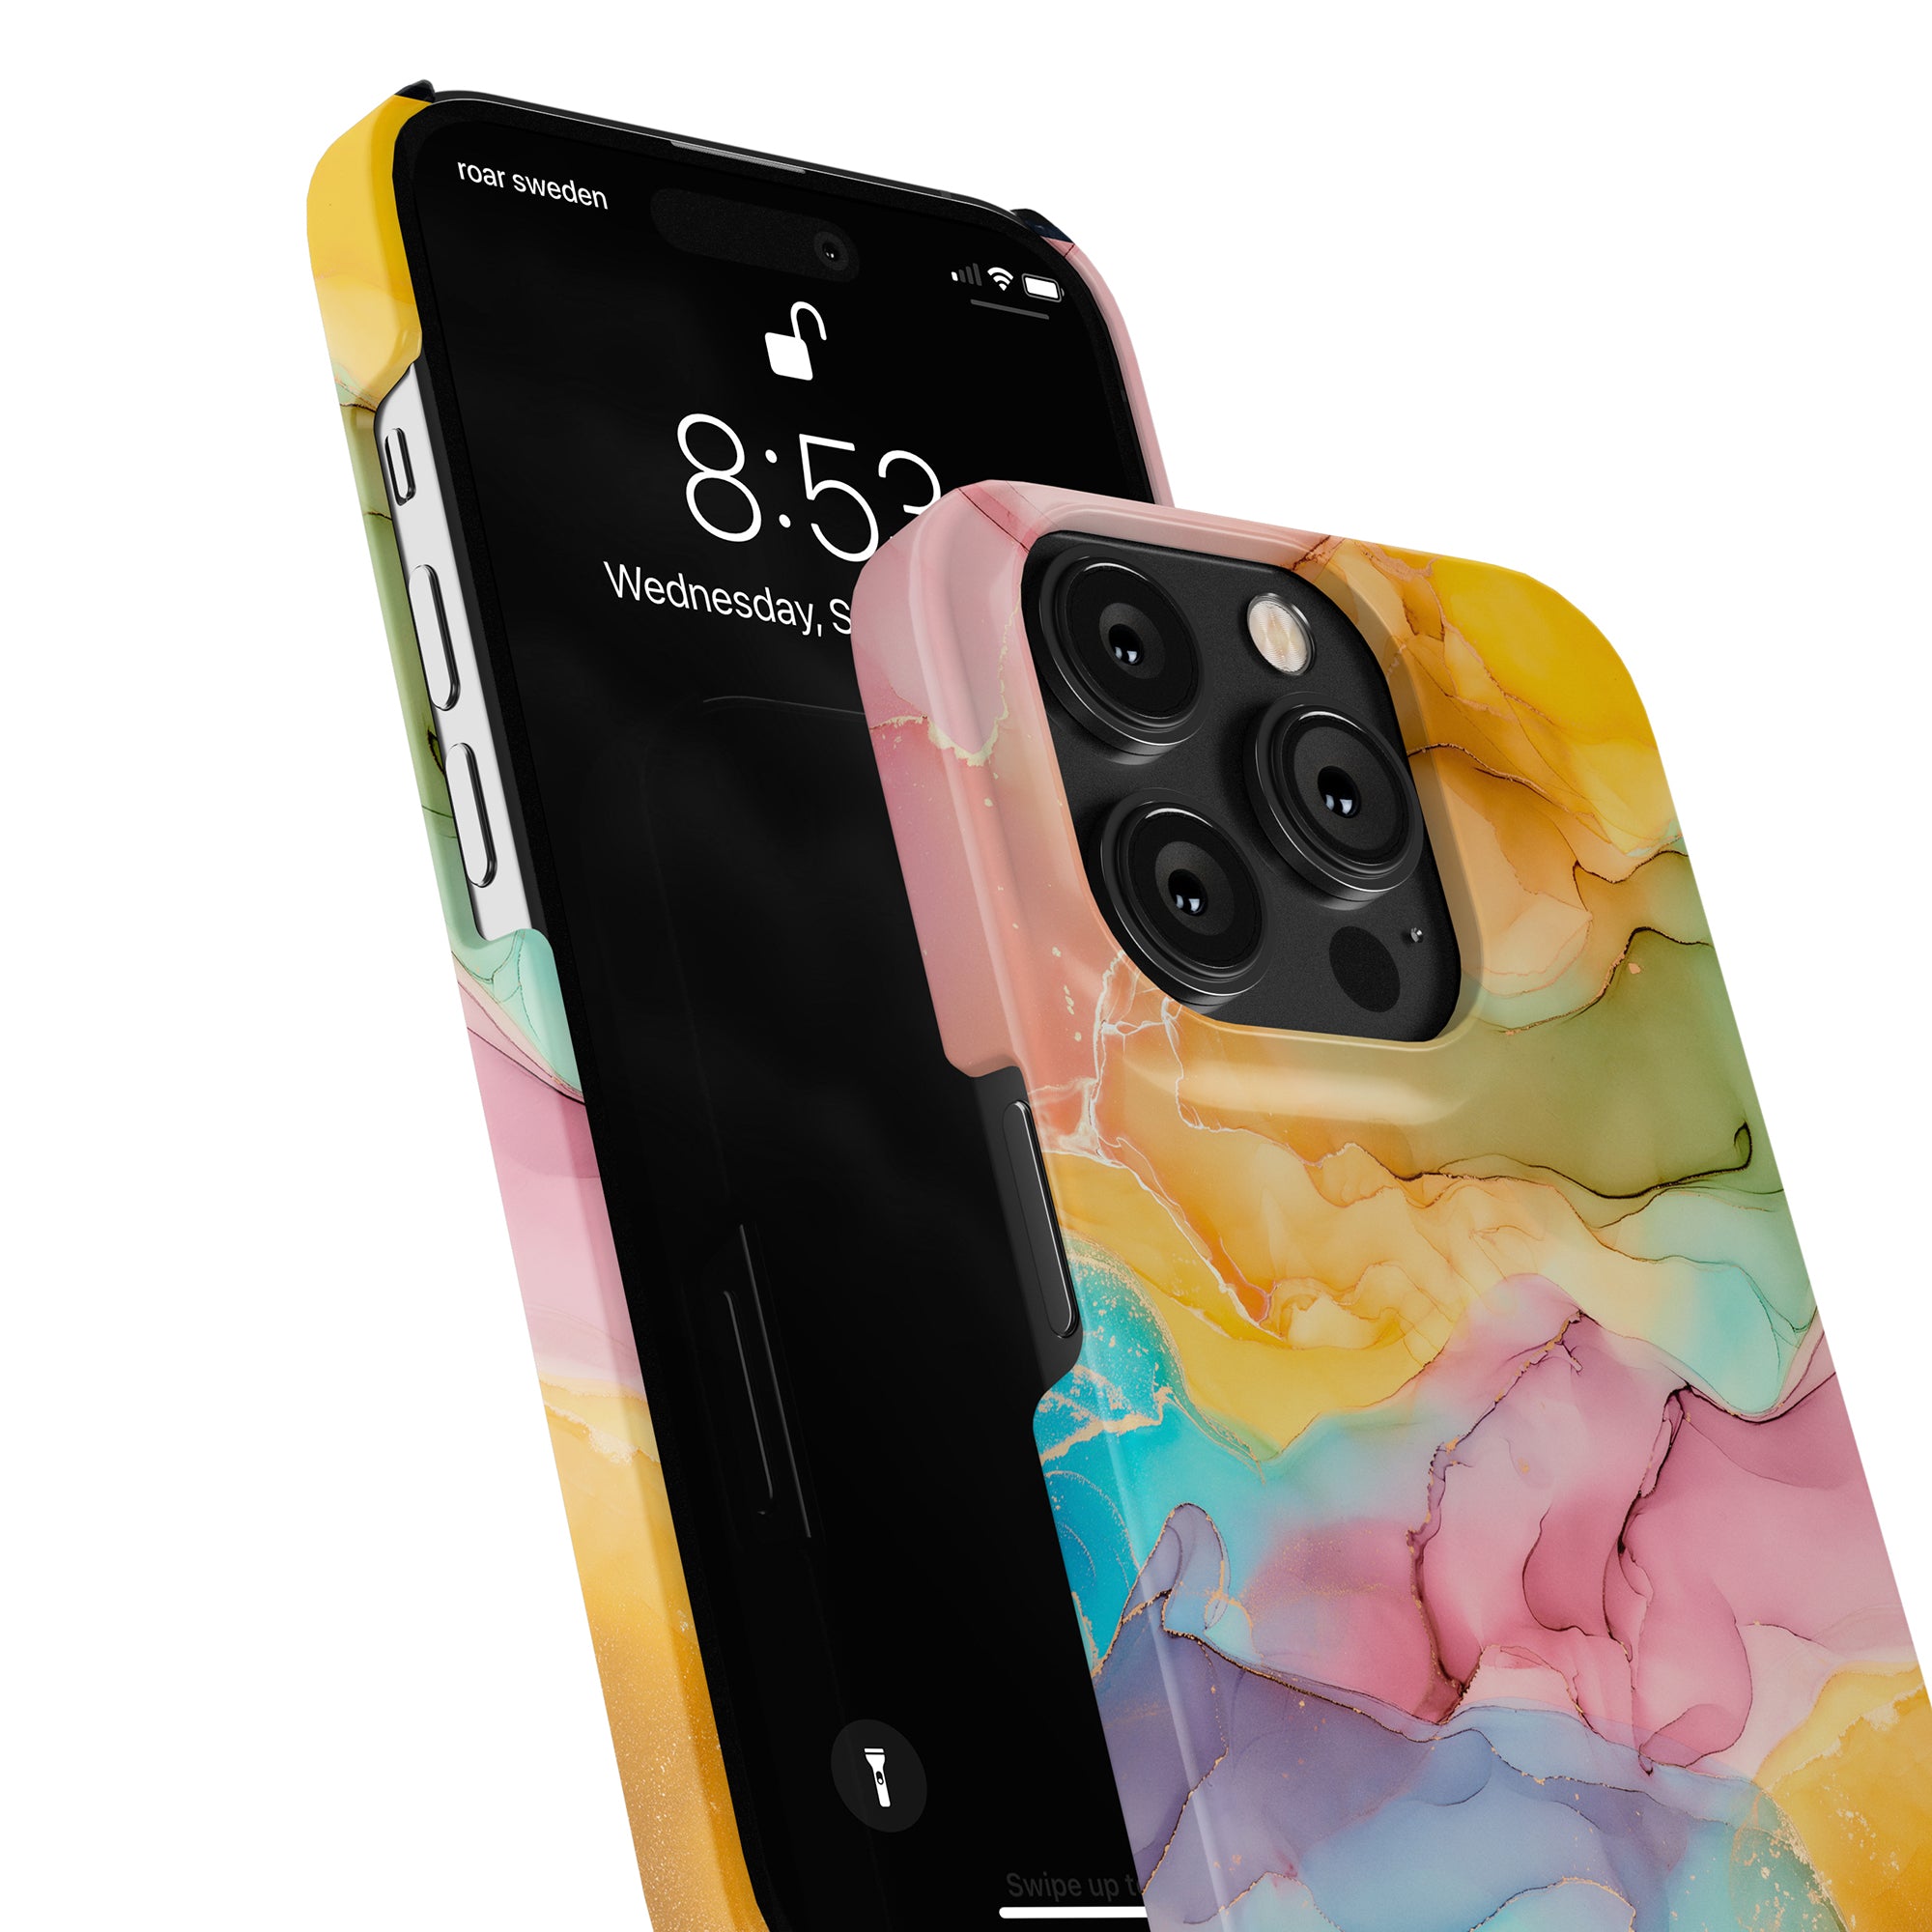 A slim and colorful Summer Breeze - Slim case that skyddar mobil for the iphone 11 pro.